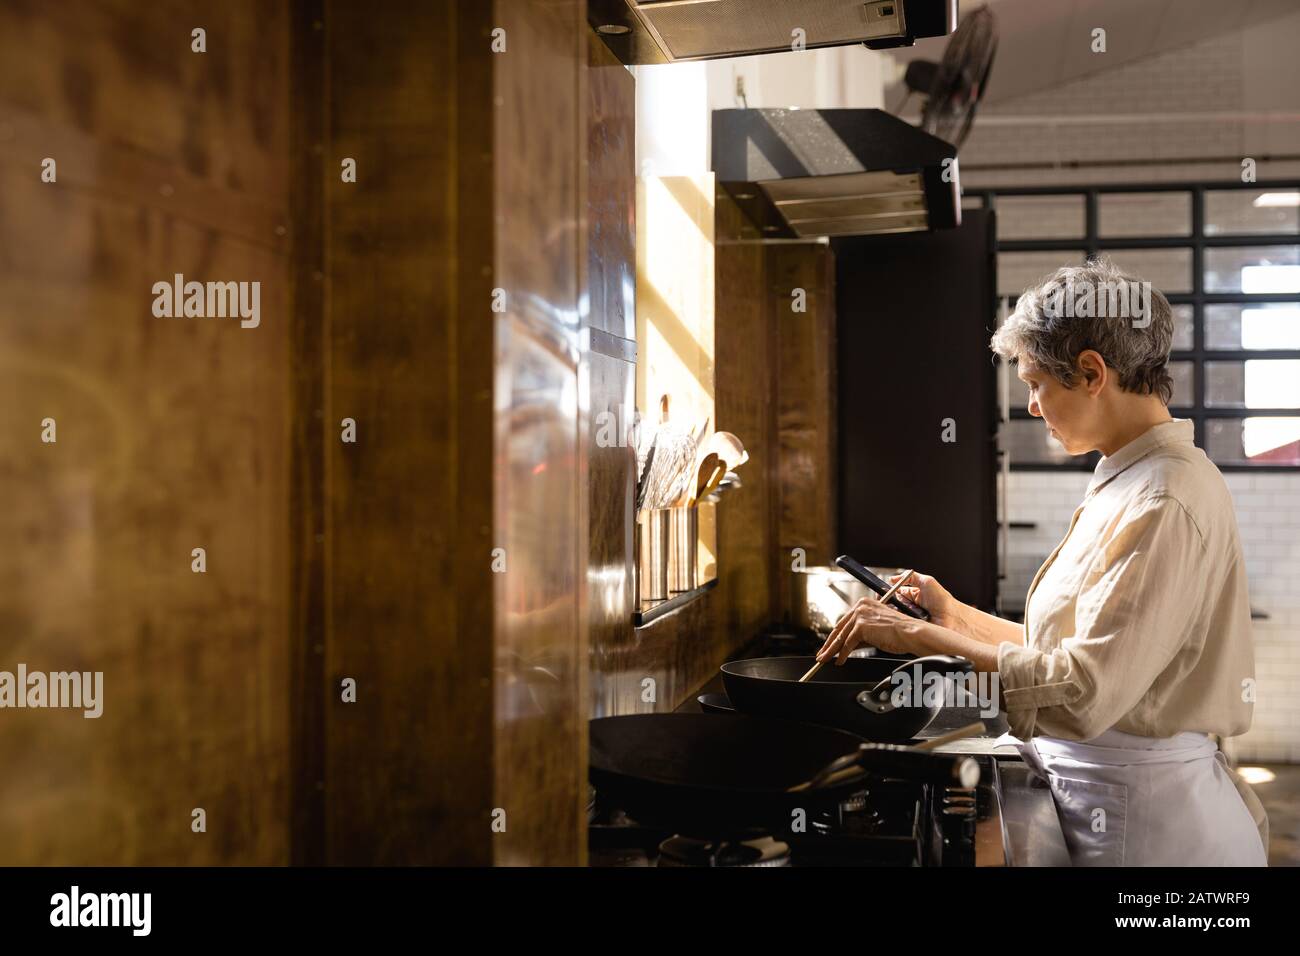 Caucasian chef cooking with her smartphone Stock Photo